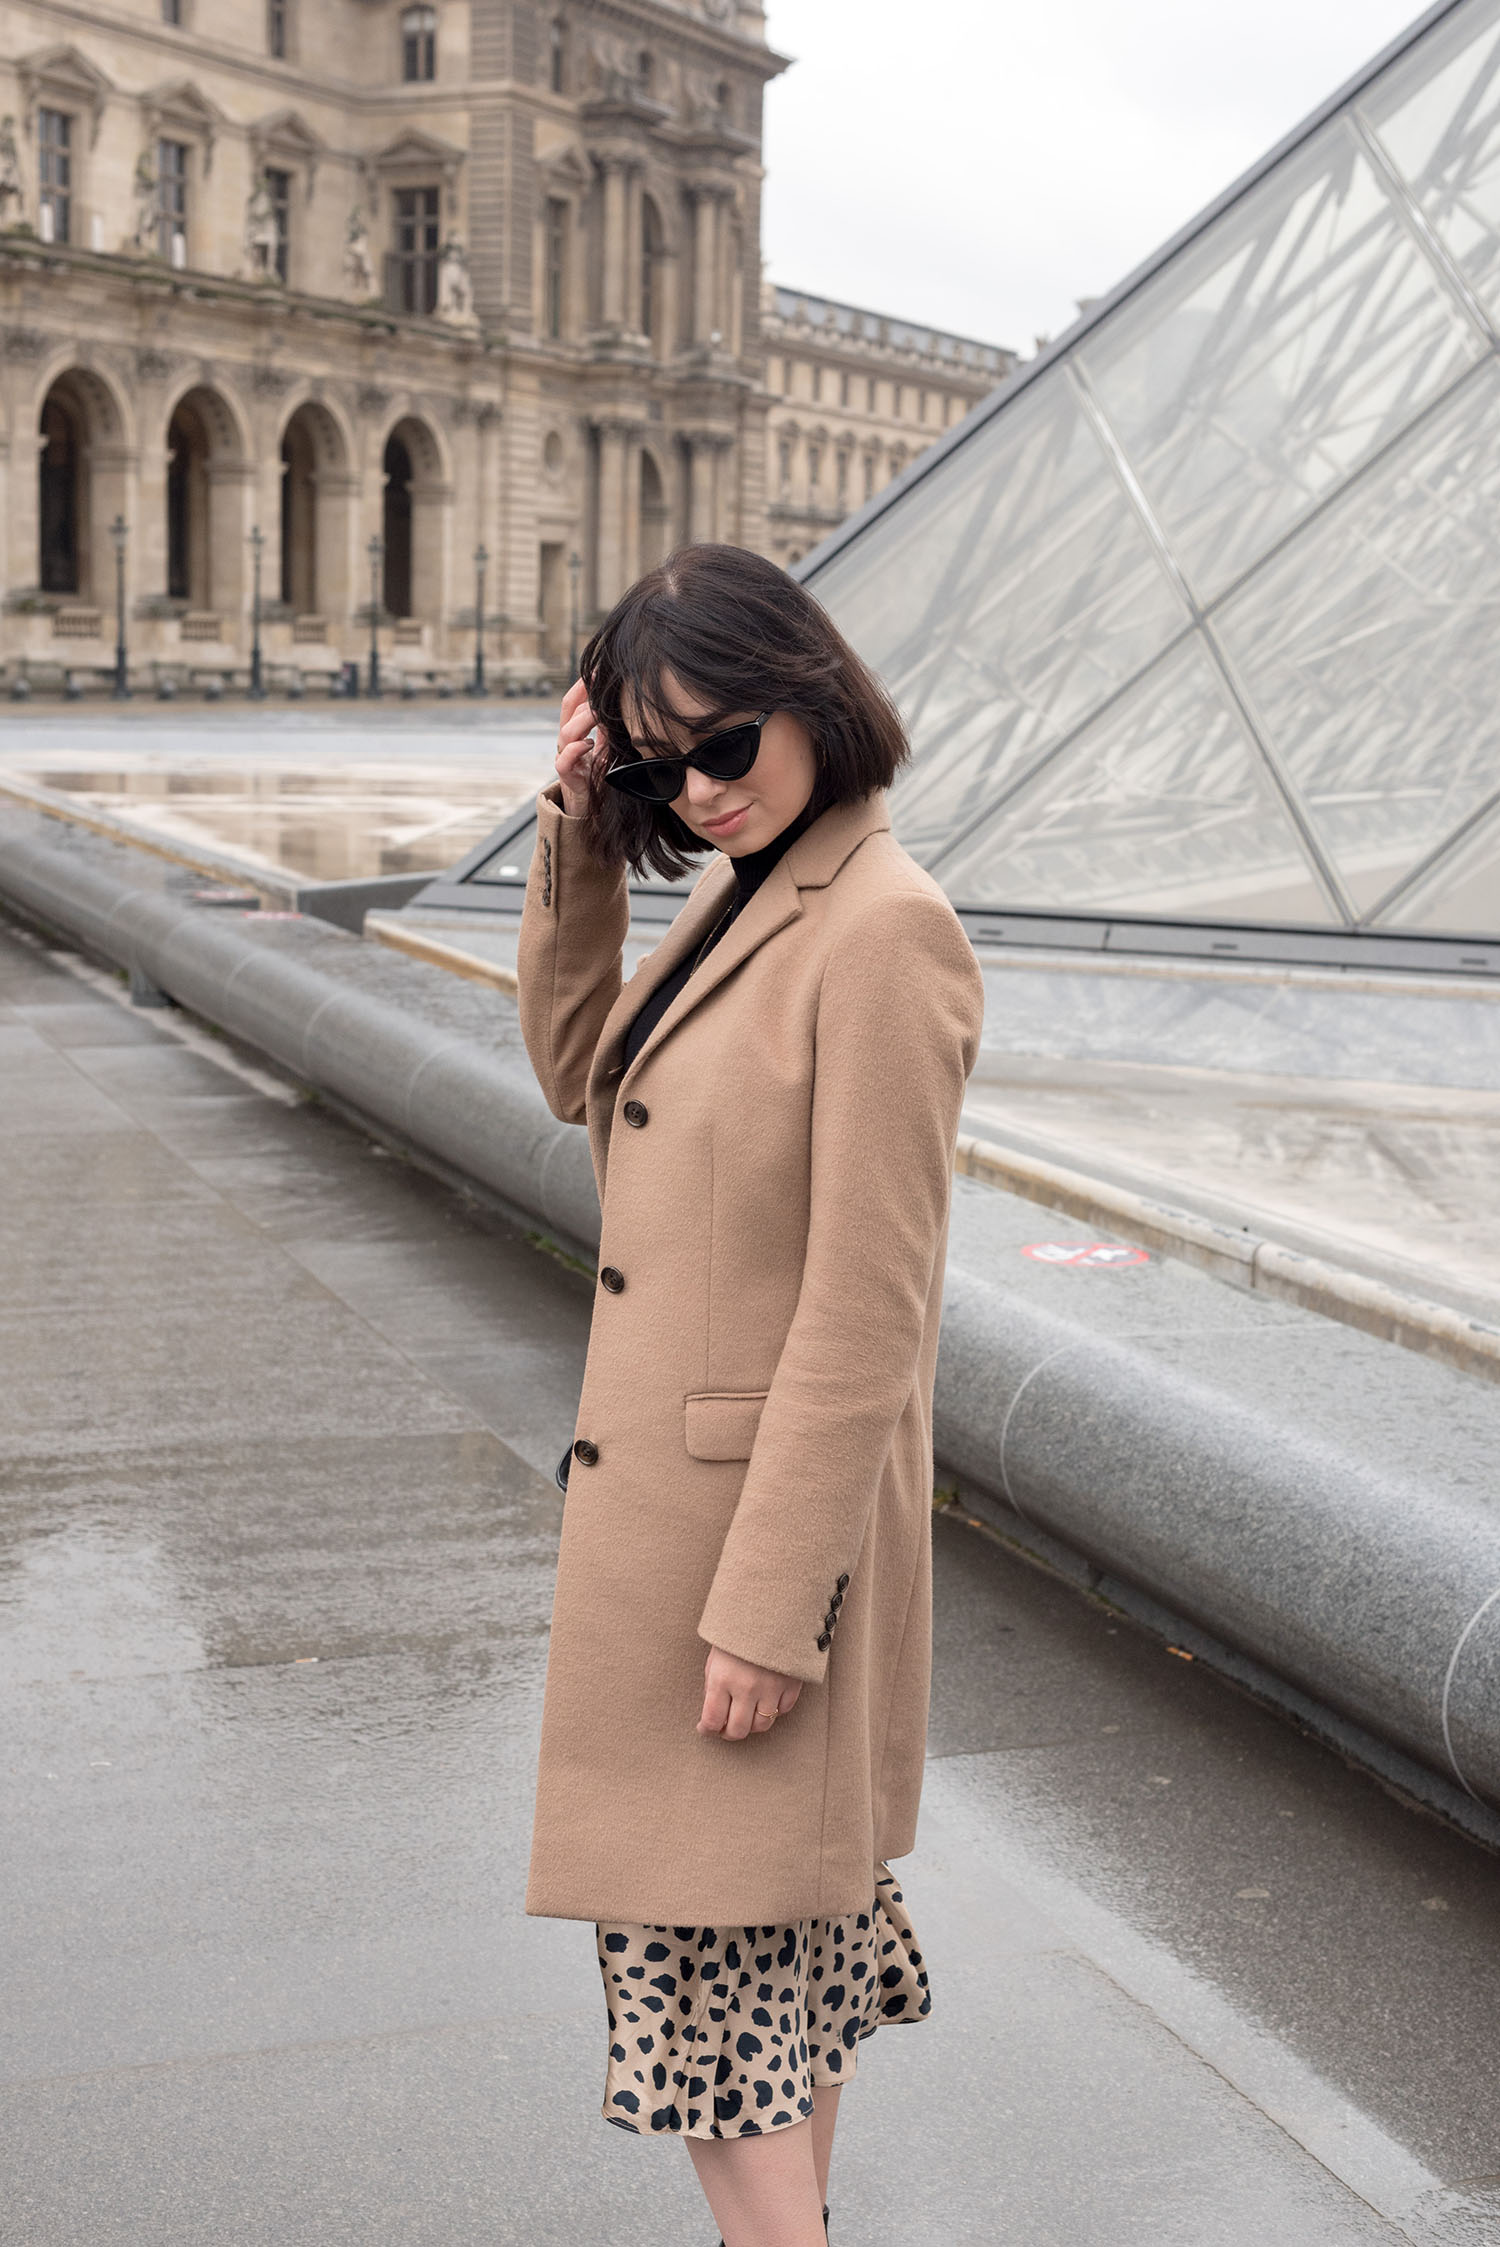 Portrait of top Canadian fashion blogger Cee Fardoe of Coco & Vera at the Louvre in Paris, wearing Zara cat eye sunglasses and a Uniqlo camel coat